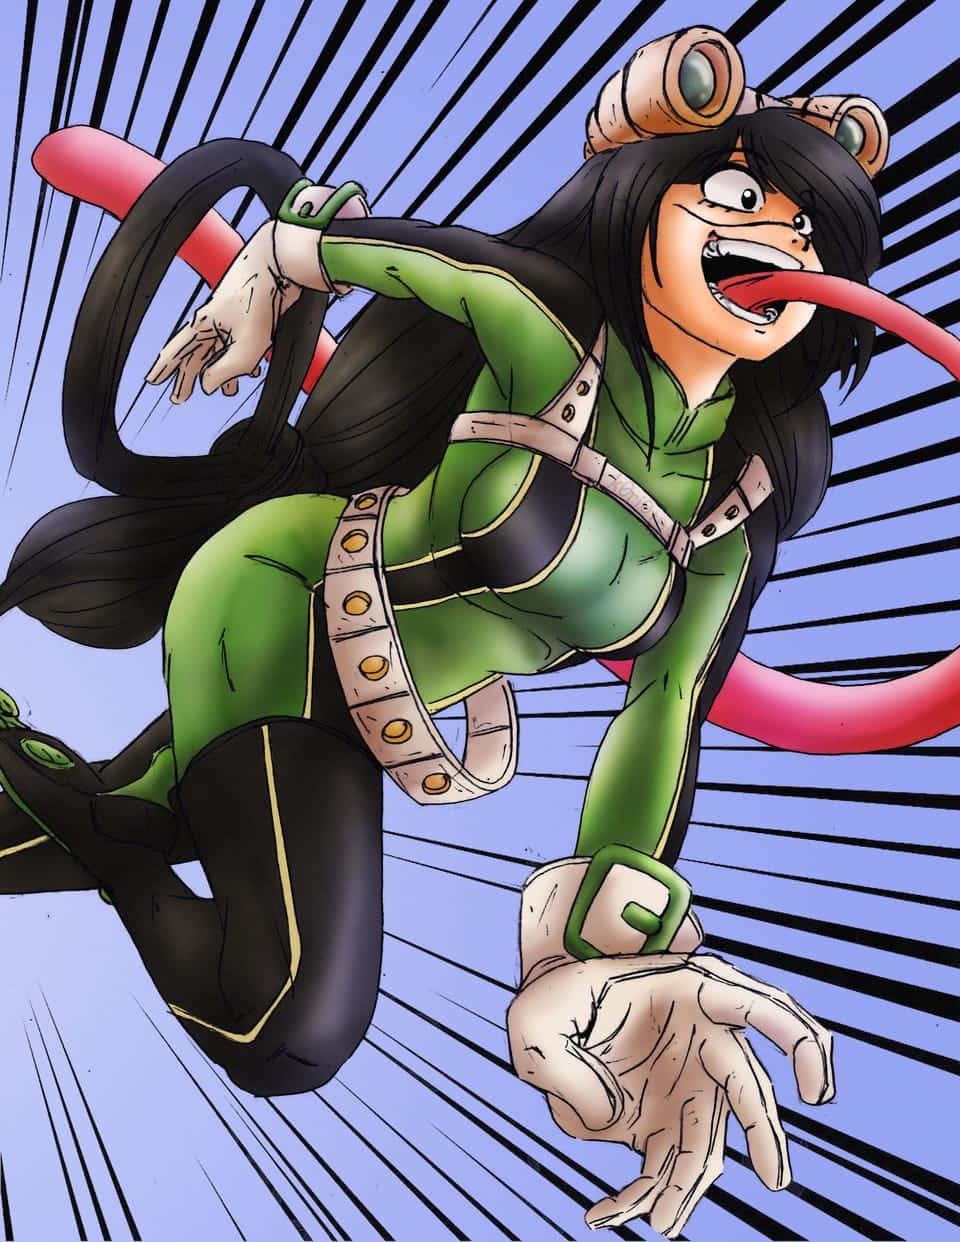 Enjoy the sun and take a dive with Froppy!